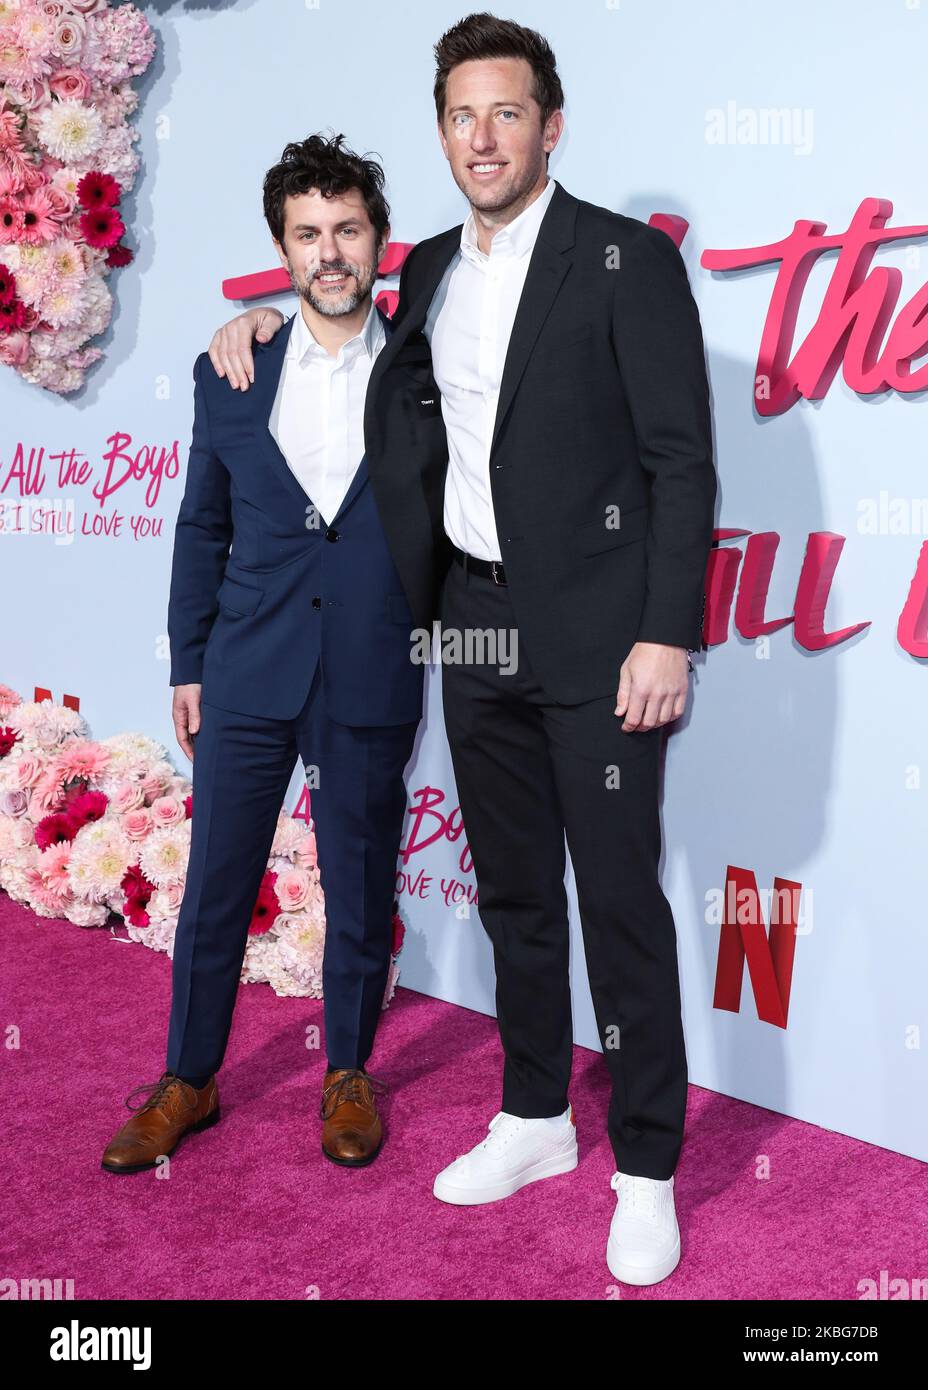 HOLLYWOOD, LOS ANGELES, CALIFORNIA, USA - FEBRUARY 03: Michael Fimognari and Matt Kaplan arrive at the Los Angeles Premiere Of Netflix's 'To All The Boys: P.S. I Still Love You' held at the Egyptian Theatre on February 3, 2020 in Hollywood, Los Angeles, California, United States. (Photo by Xavier Collin/Image Press Agency/NurPhoto) Stock Photo